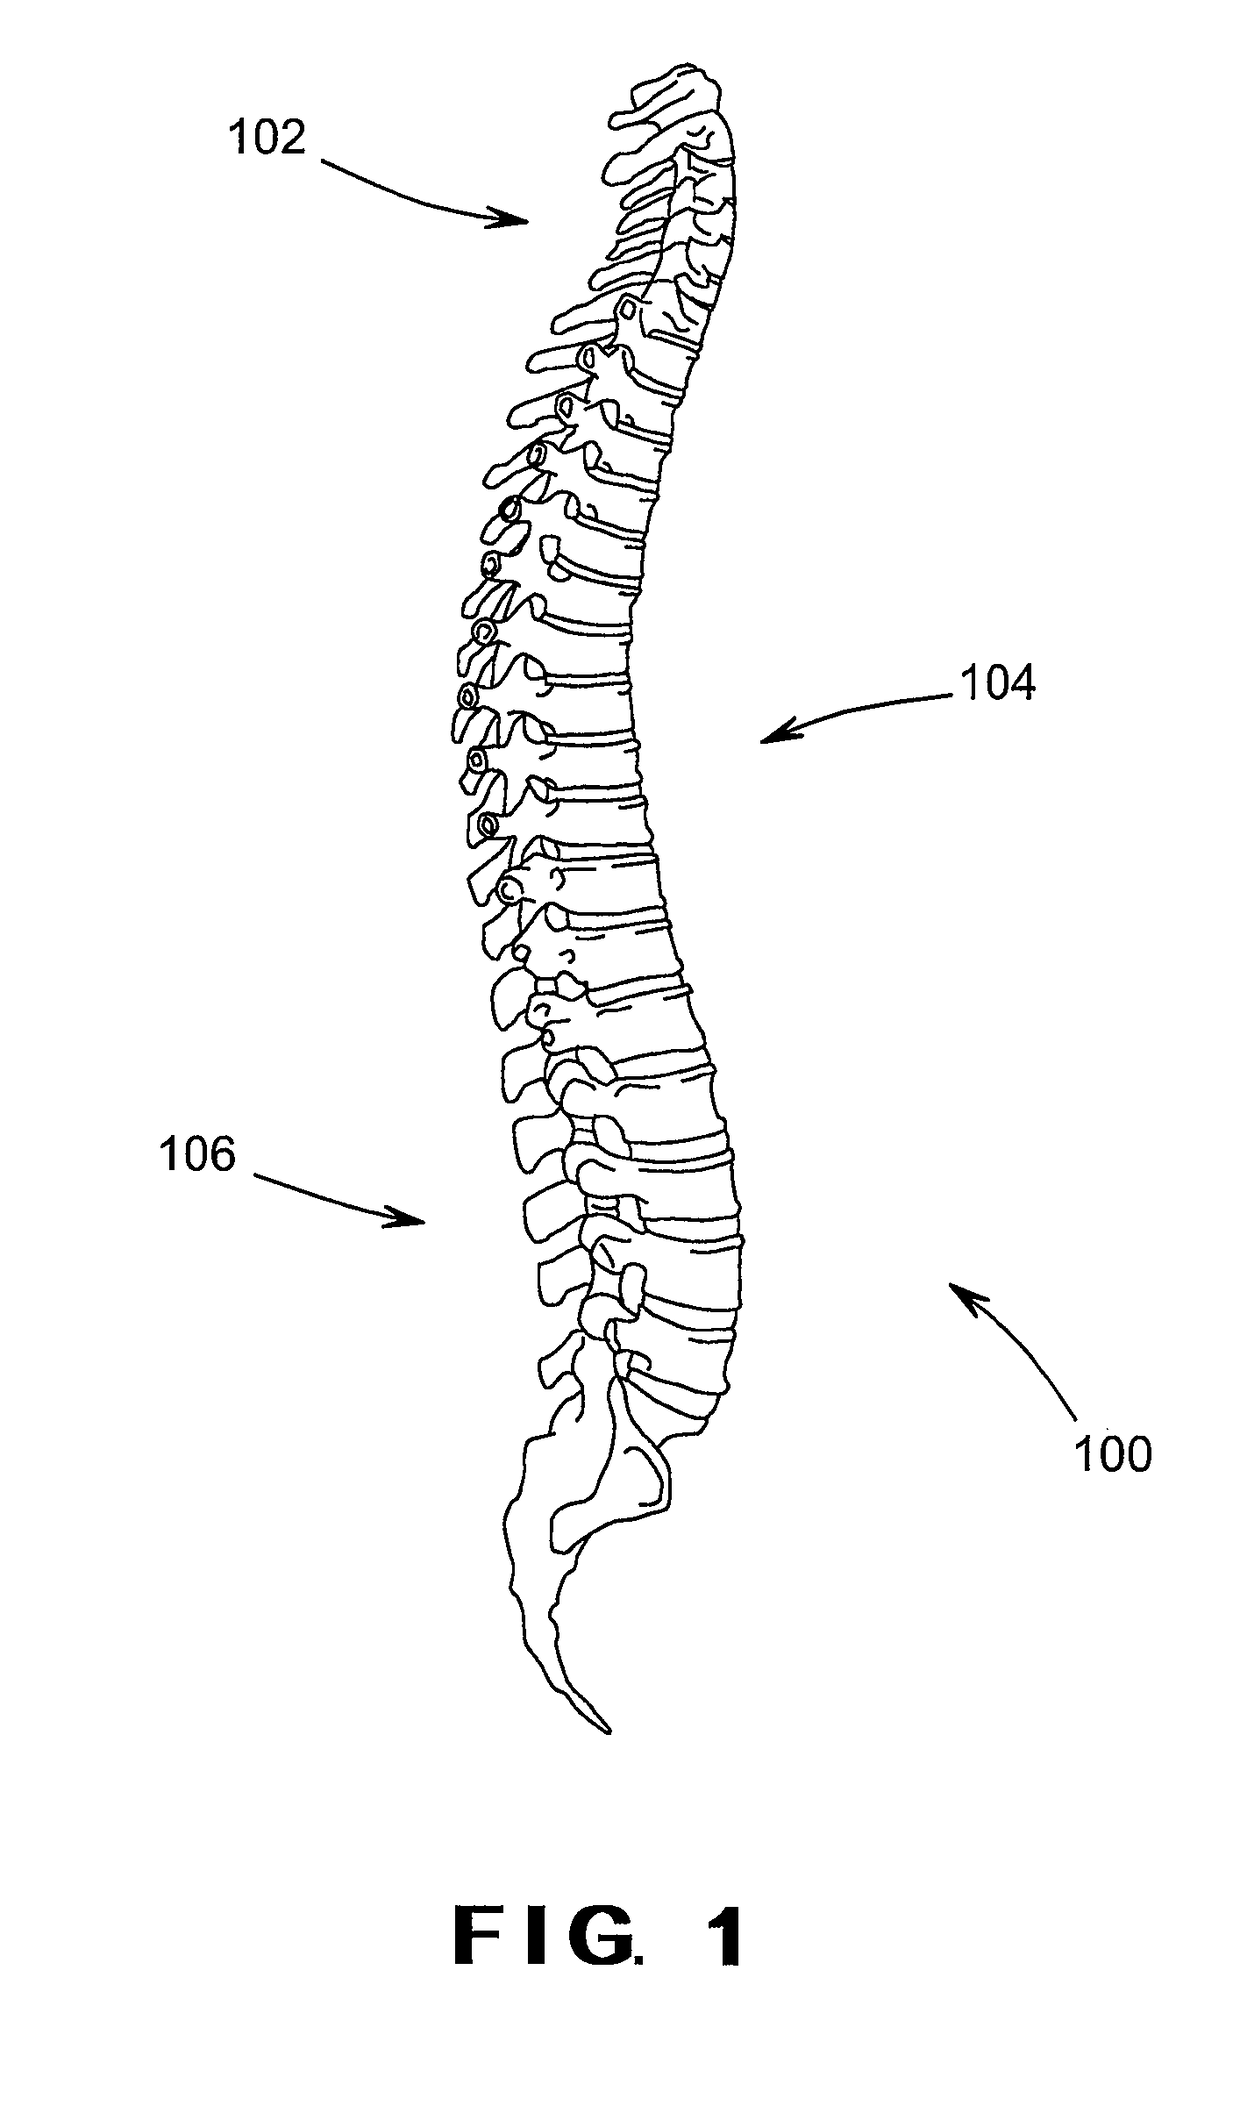 Devices and method for treatment of spondylotic disease